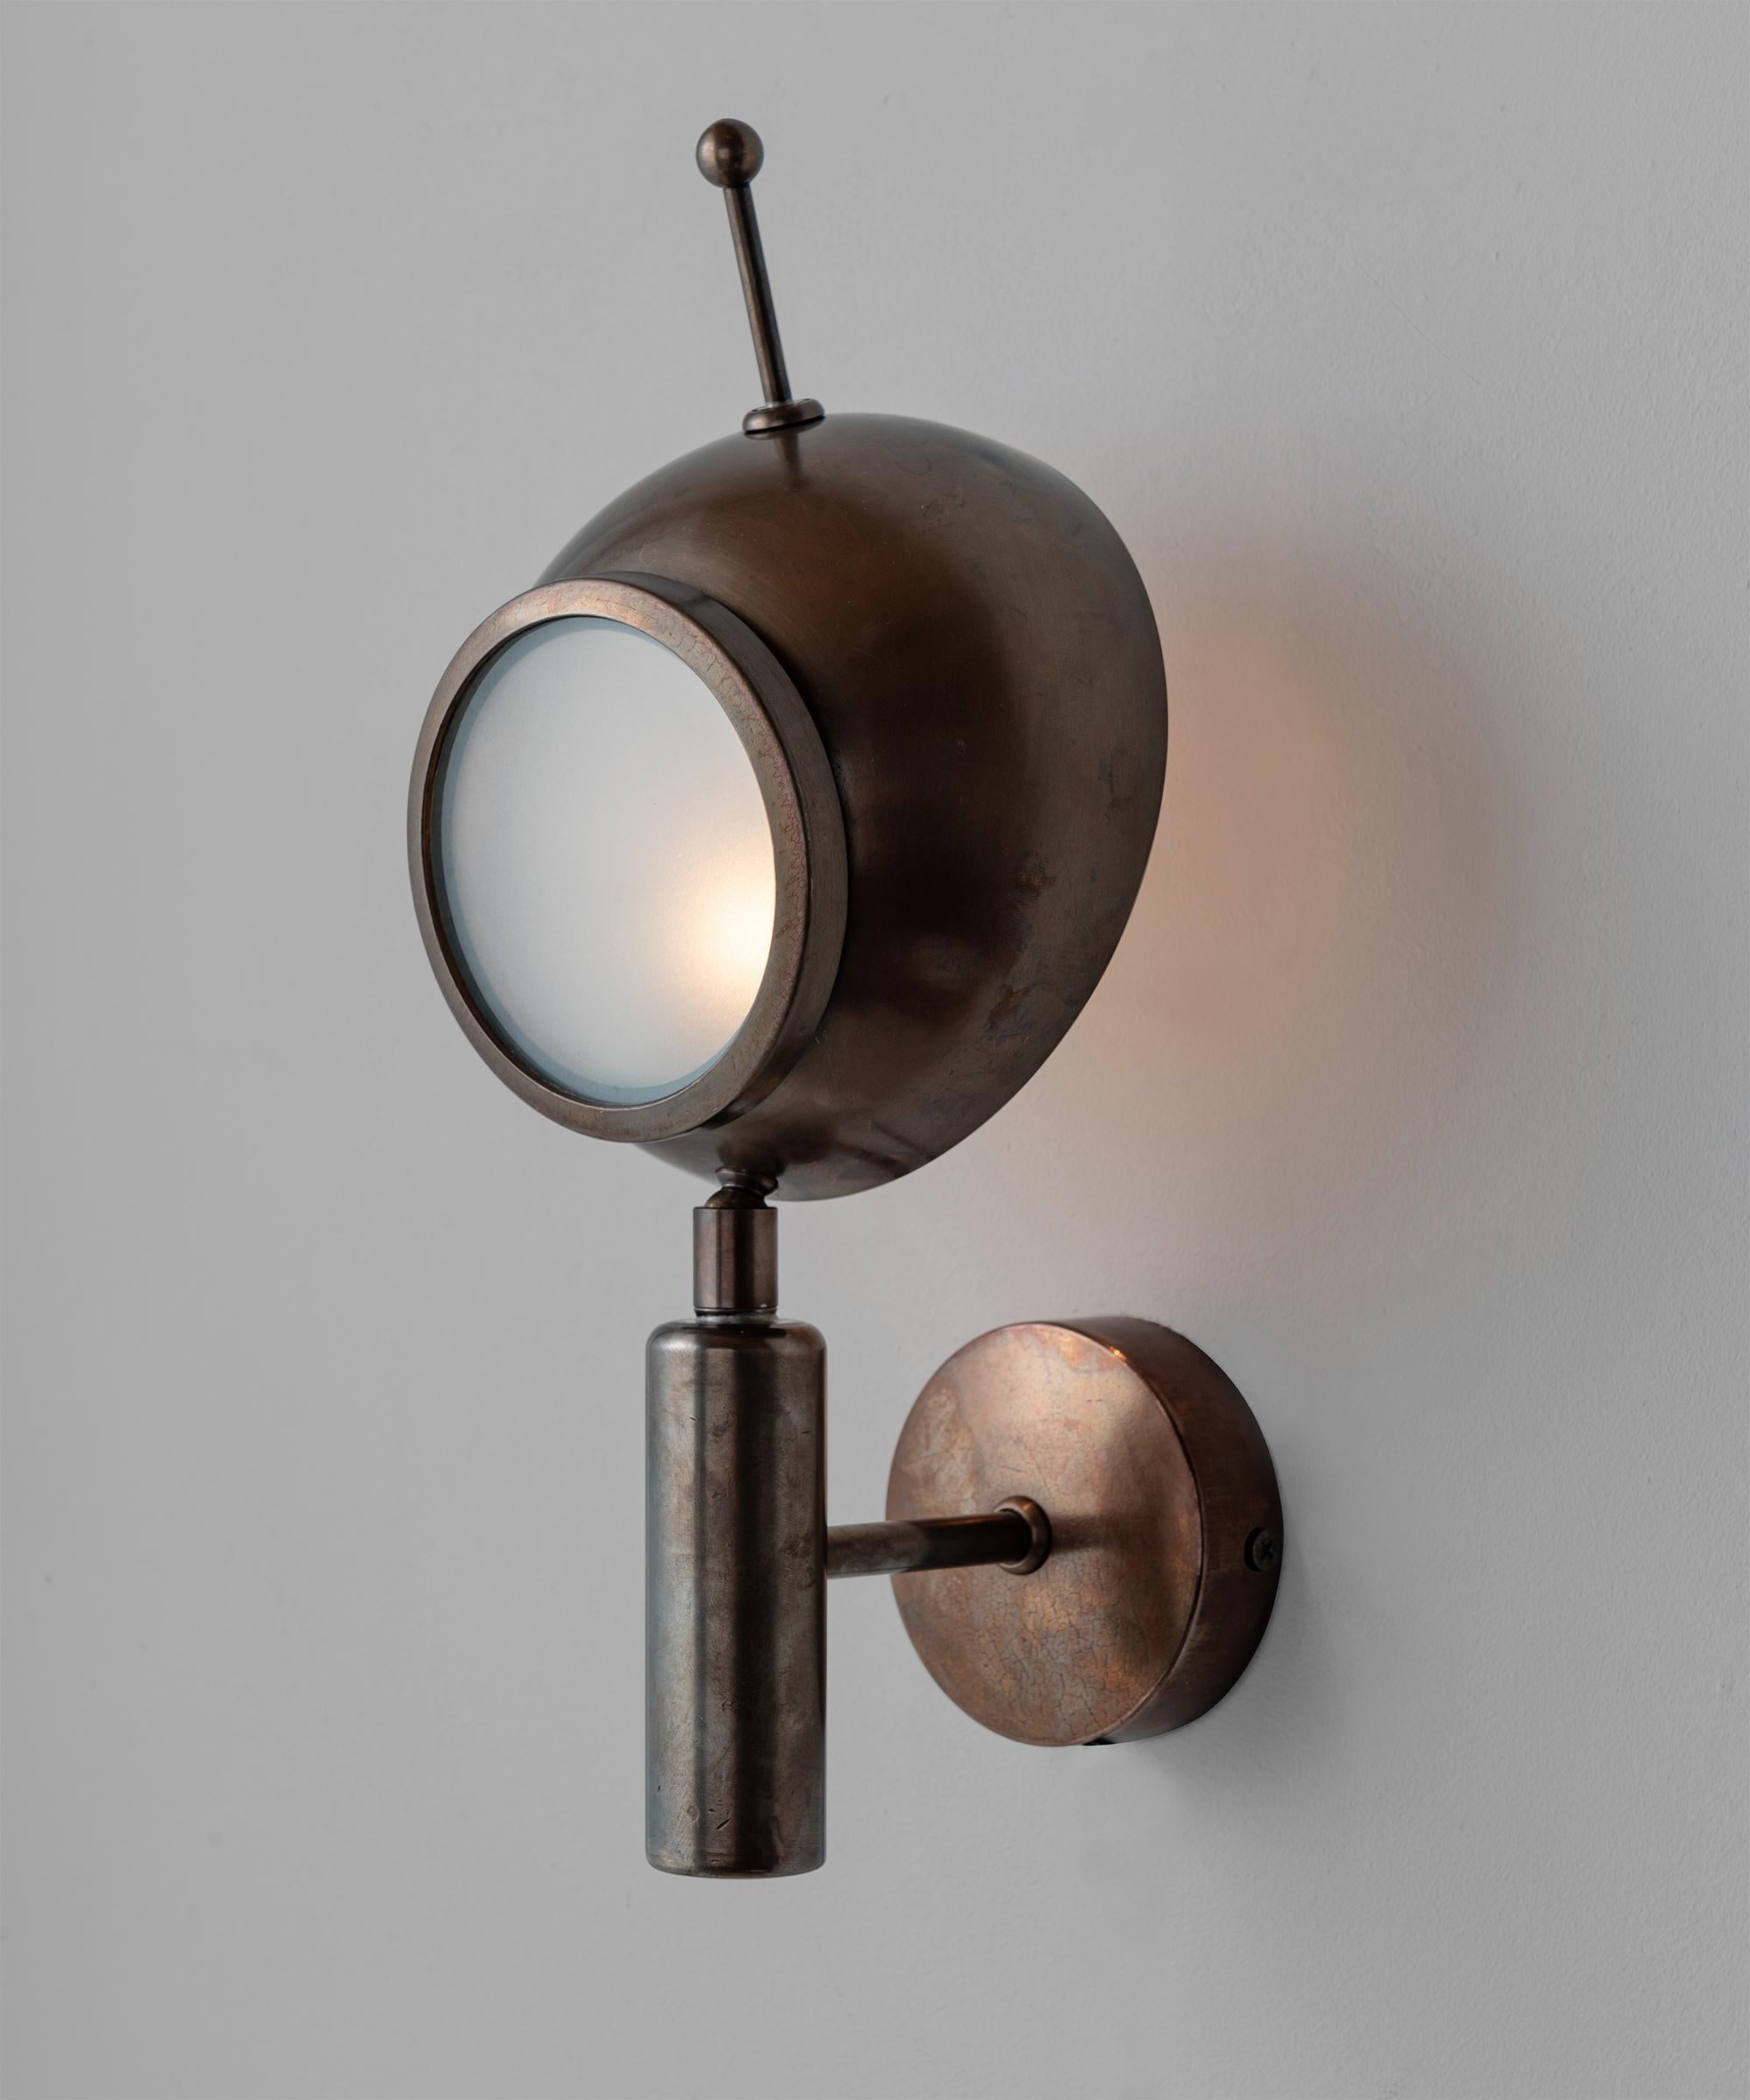 Brass and frosted glass wall sconce, Italy 21st century

Made in Italy

Articulating wall light with hand patinated brass with frosted glass diffuser.

*Please Note: This fixture is made to order in Italy, and comes newly wired (eu wiring). It is